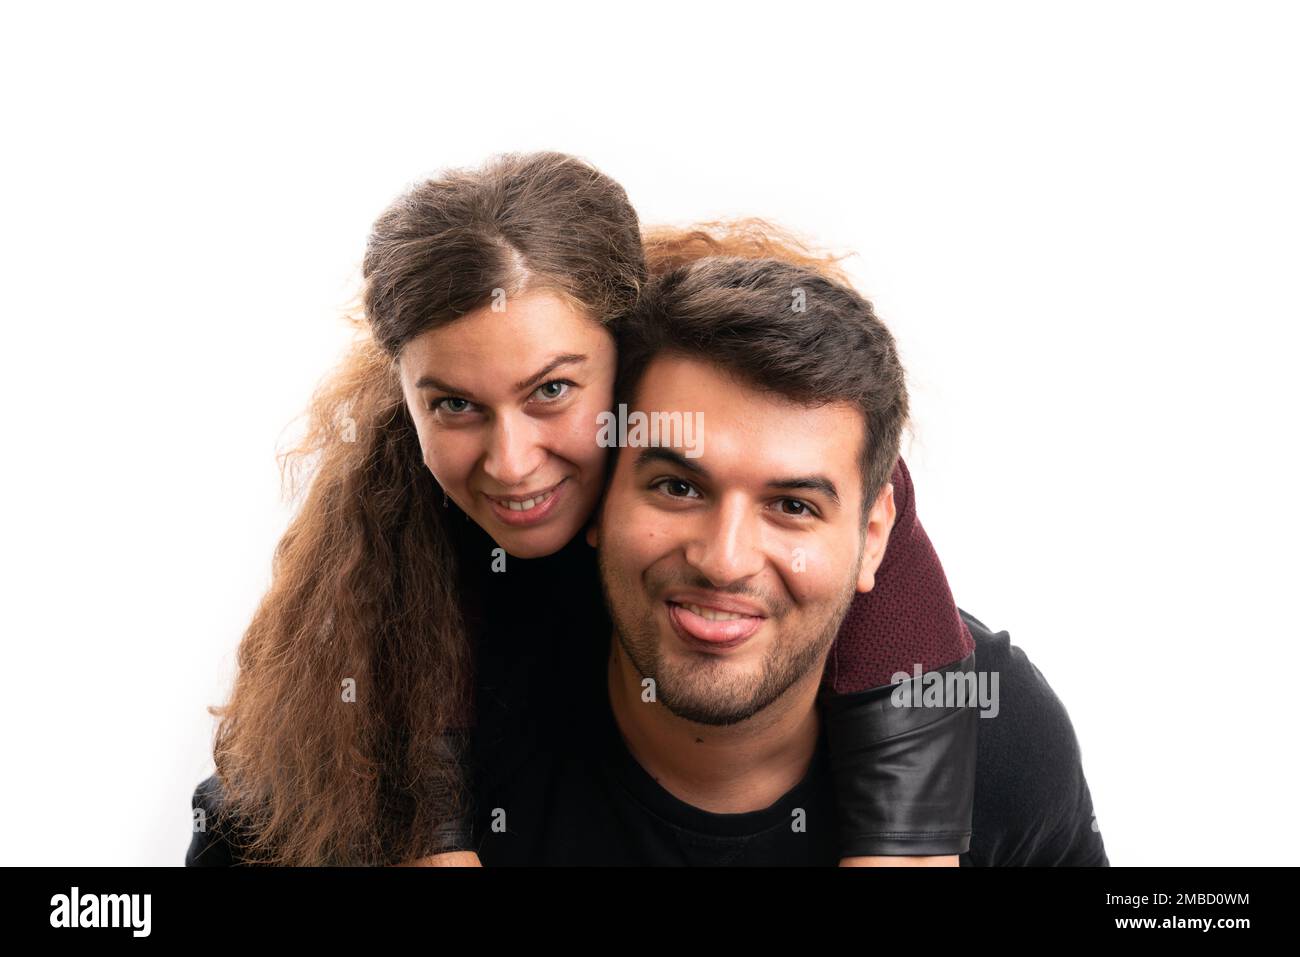 Cute young girlfriend hugging funny goofy boyfriend with tongue out close-up as love relationship concept isolated on white background Stock Photo